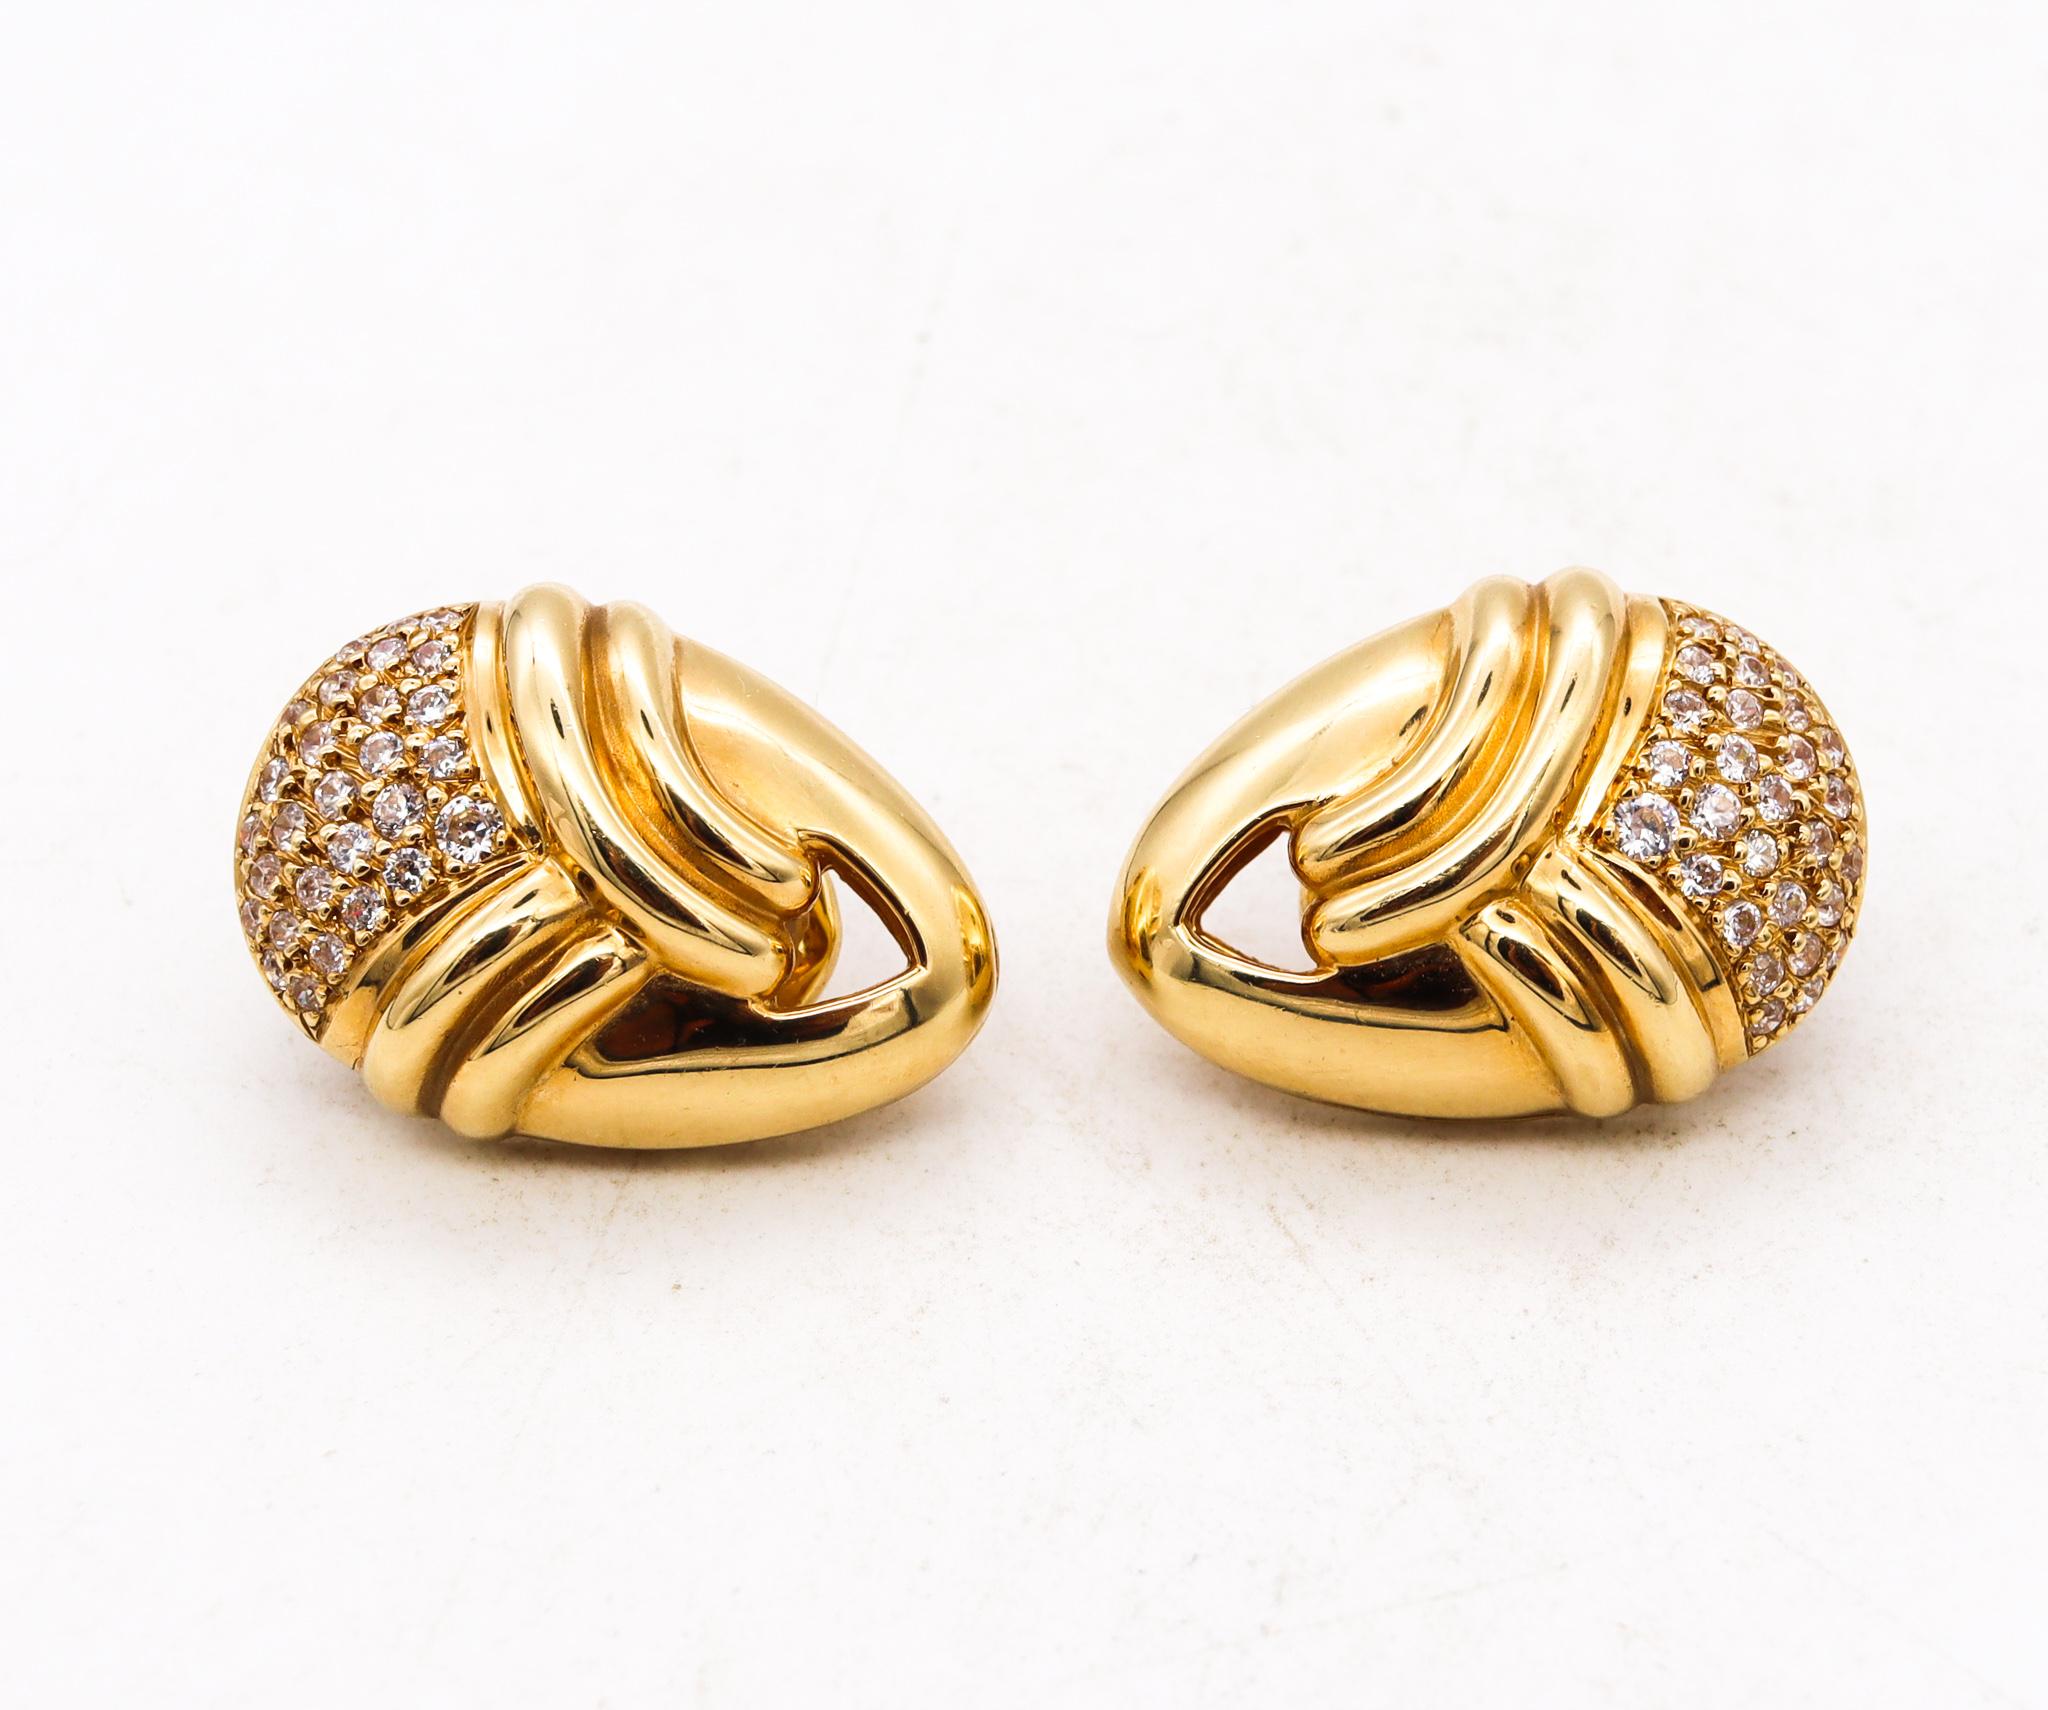 Michael Gates Drapery Clips Earrings Solid 18kt Yellow Gold 1.68 Cts in Diamonds For Sale 1